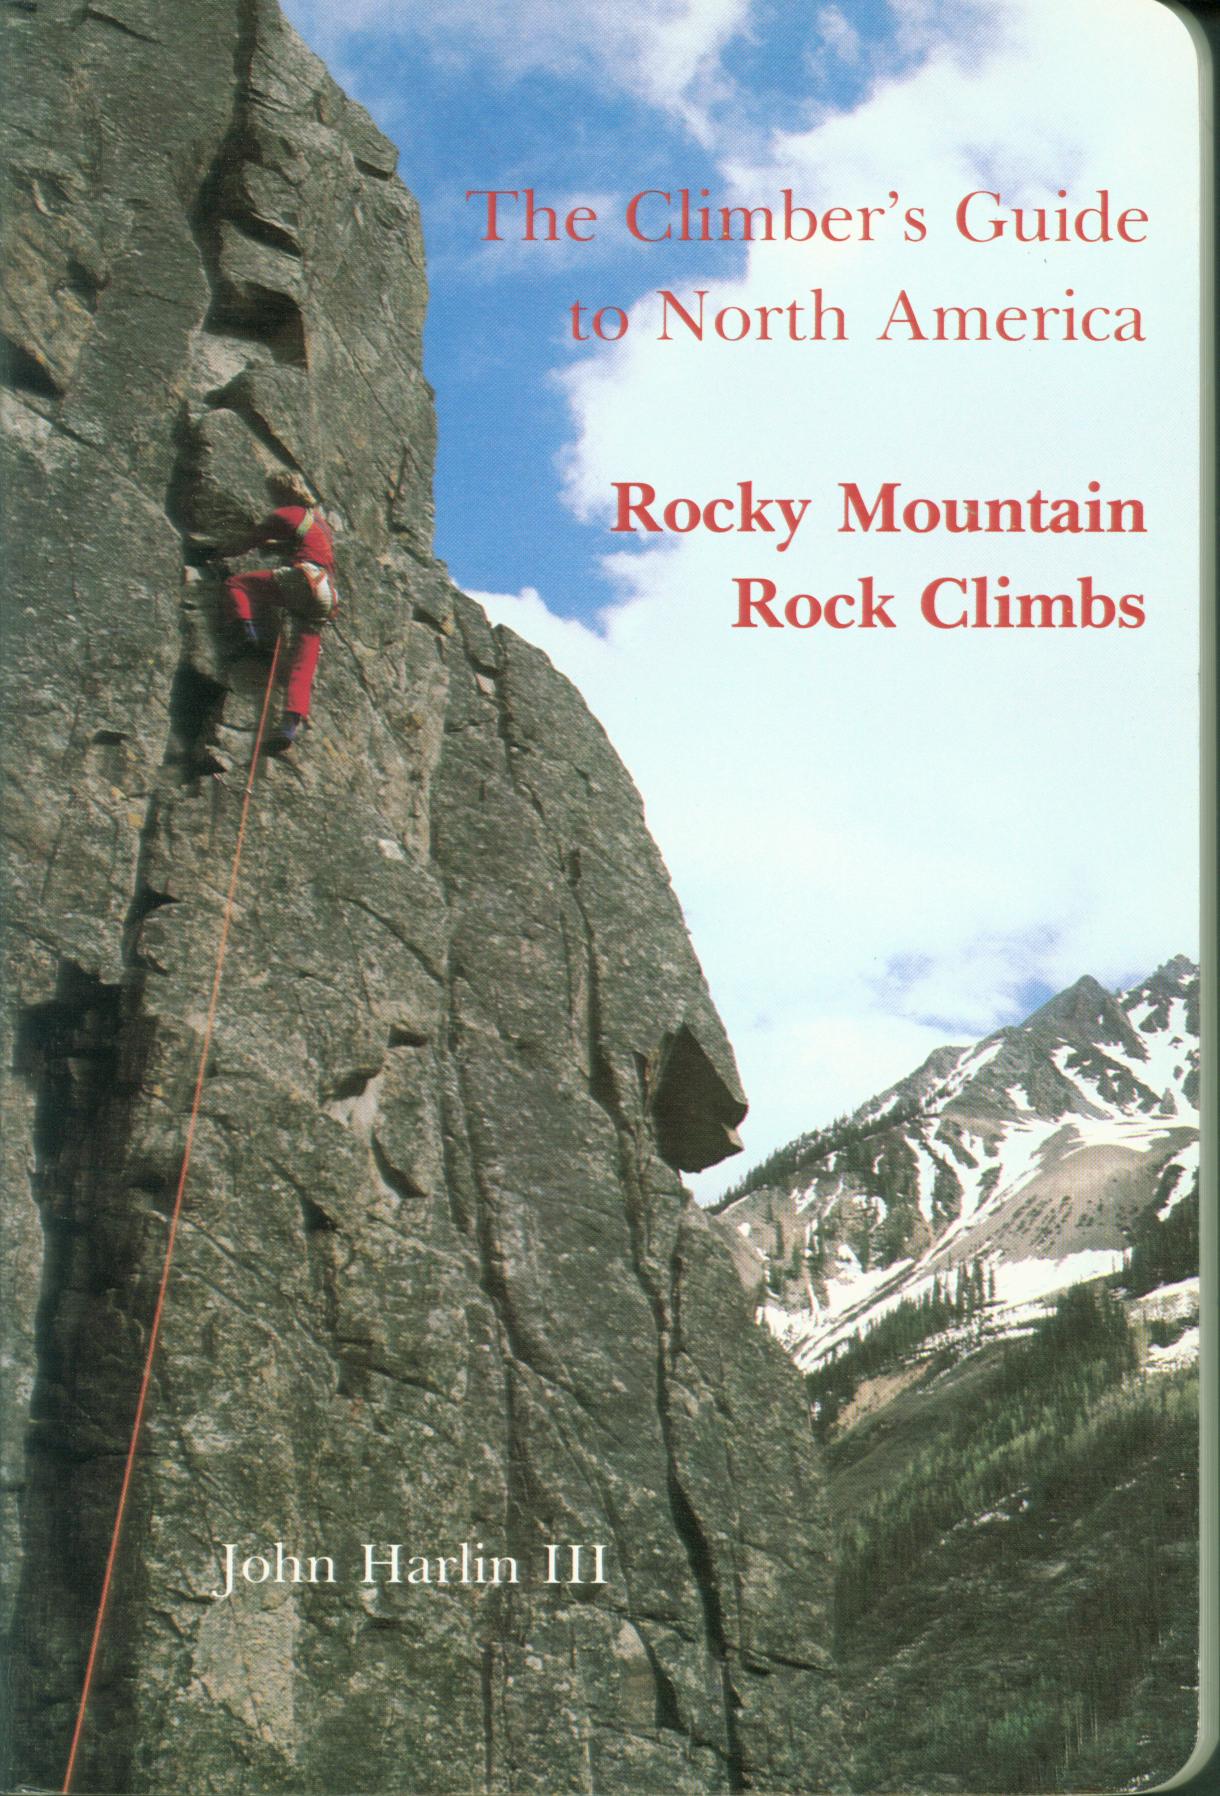 HE CLIMBER'S GUIDE TO NORTH AMERICA: Rocky Mountain rock climbs.